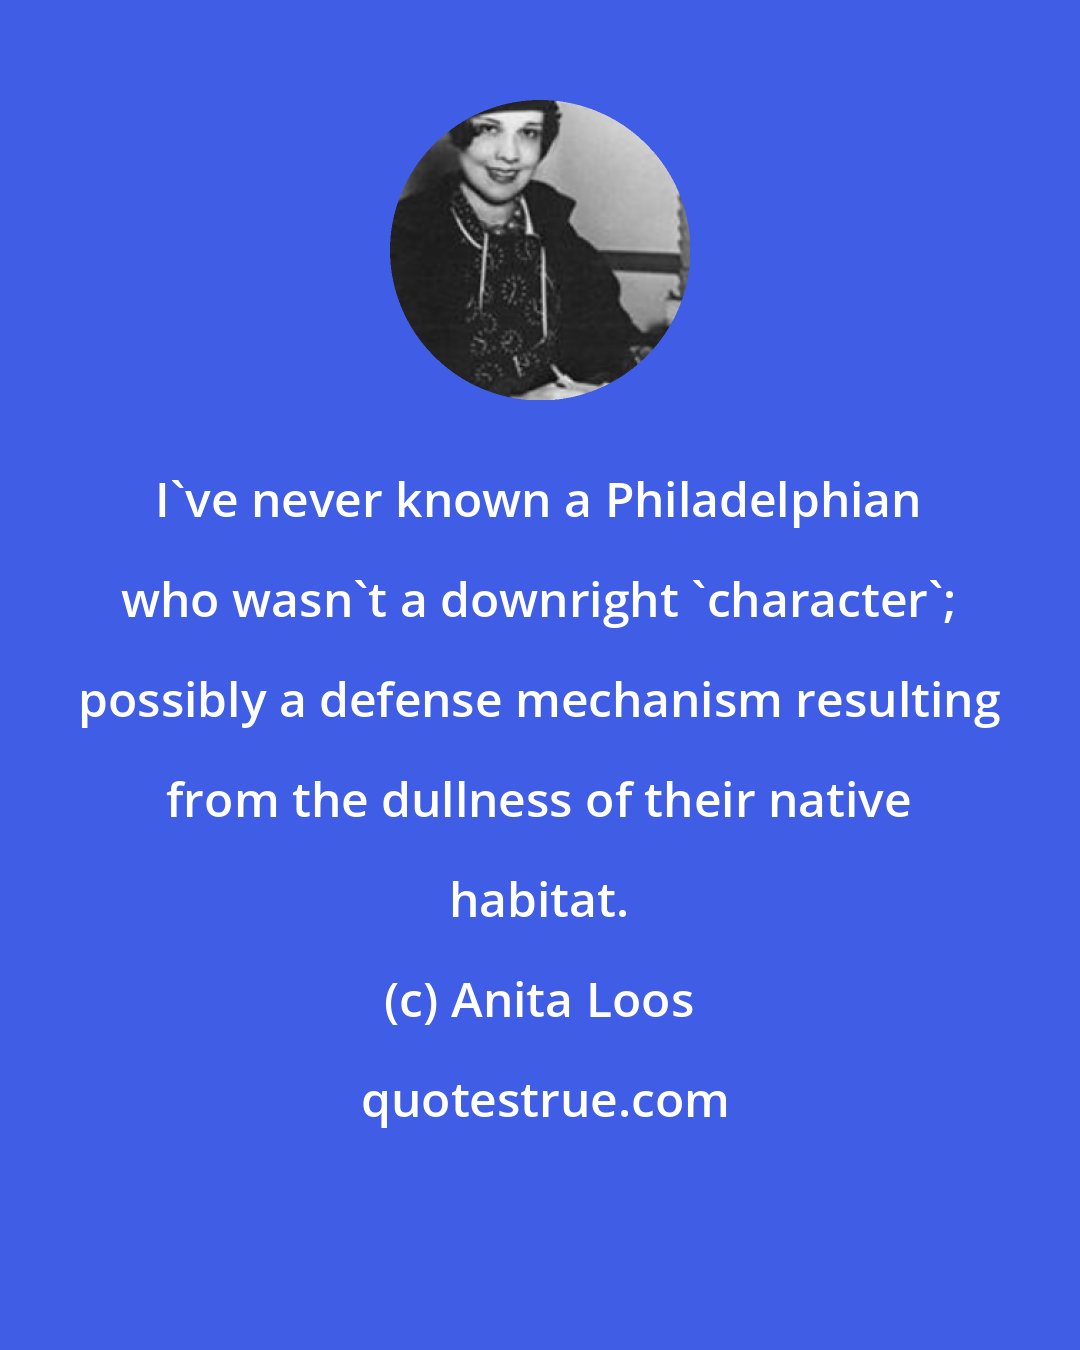 Anita Loos: I've never known a Philadelphian who wasn't a downright 'character'; possibly a defense mechanism resulting from the dullness of their native habitat.